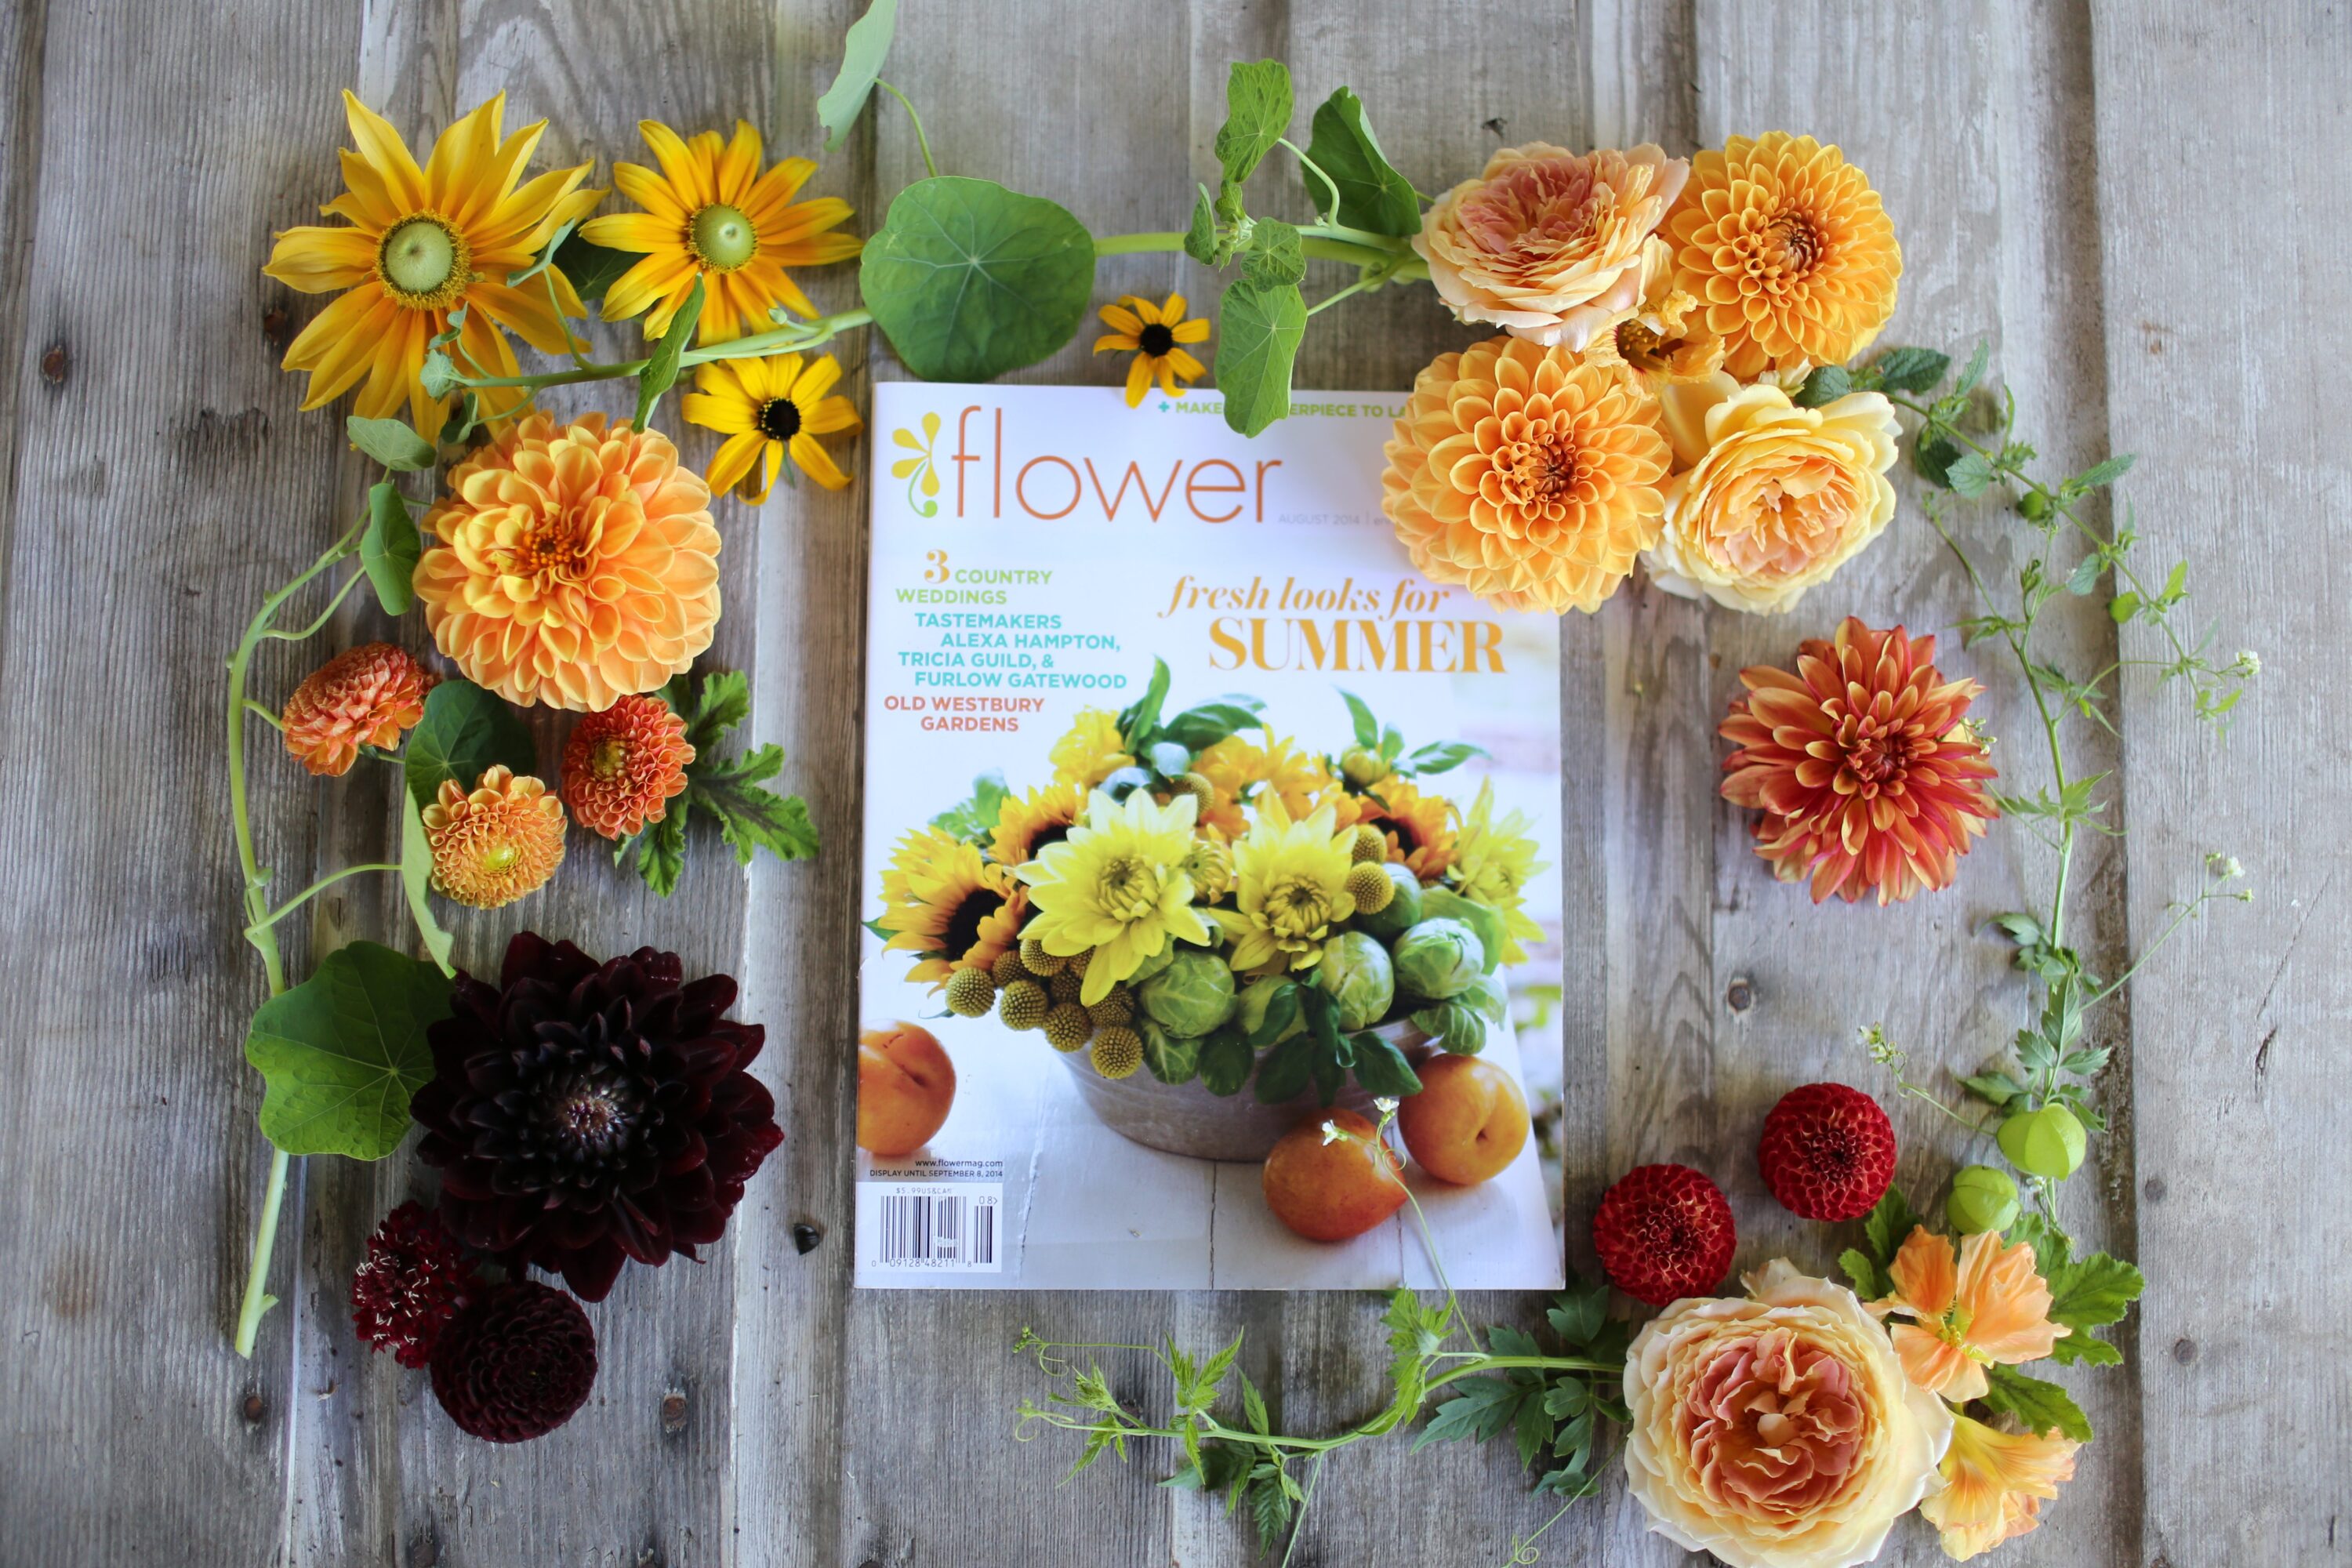 Flower magazine surrounded by flowers